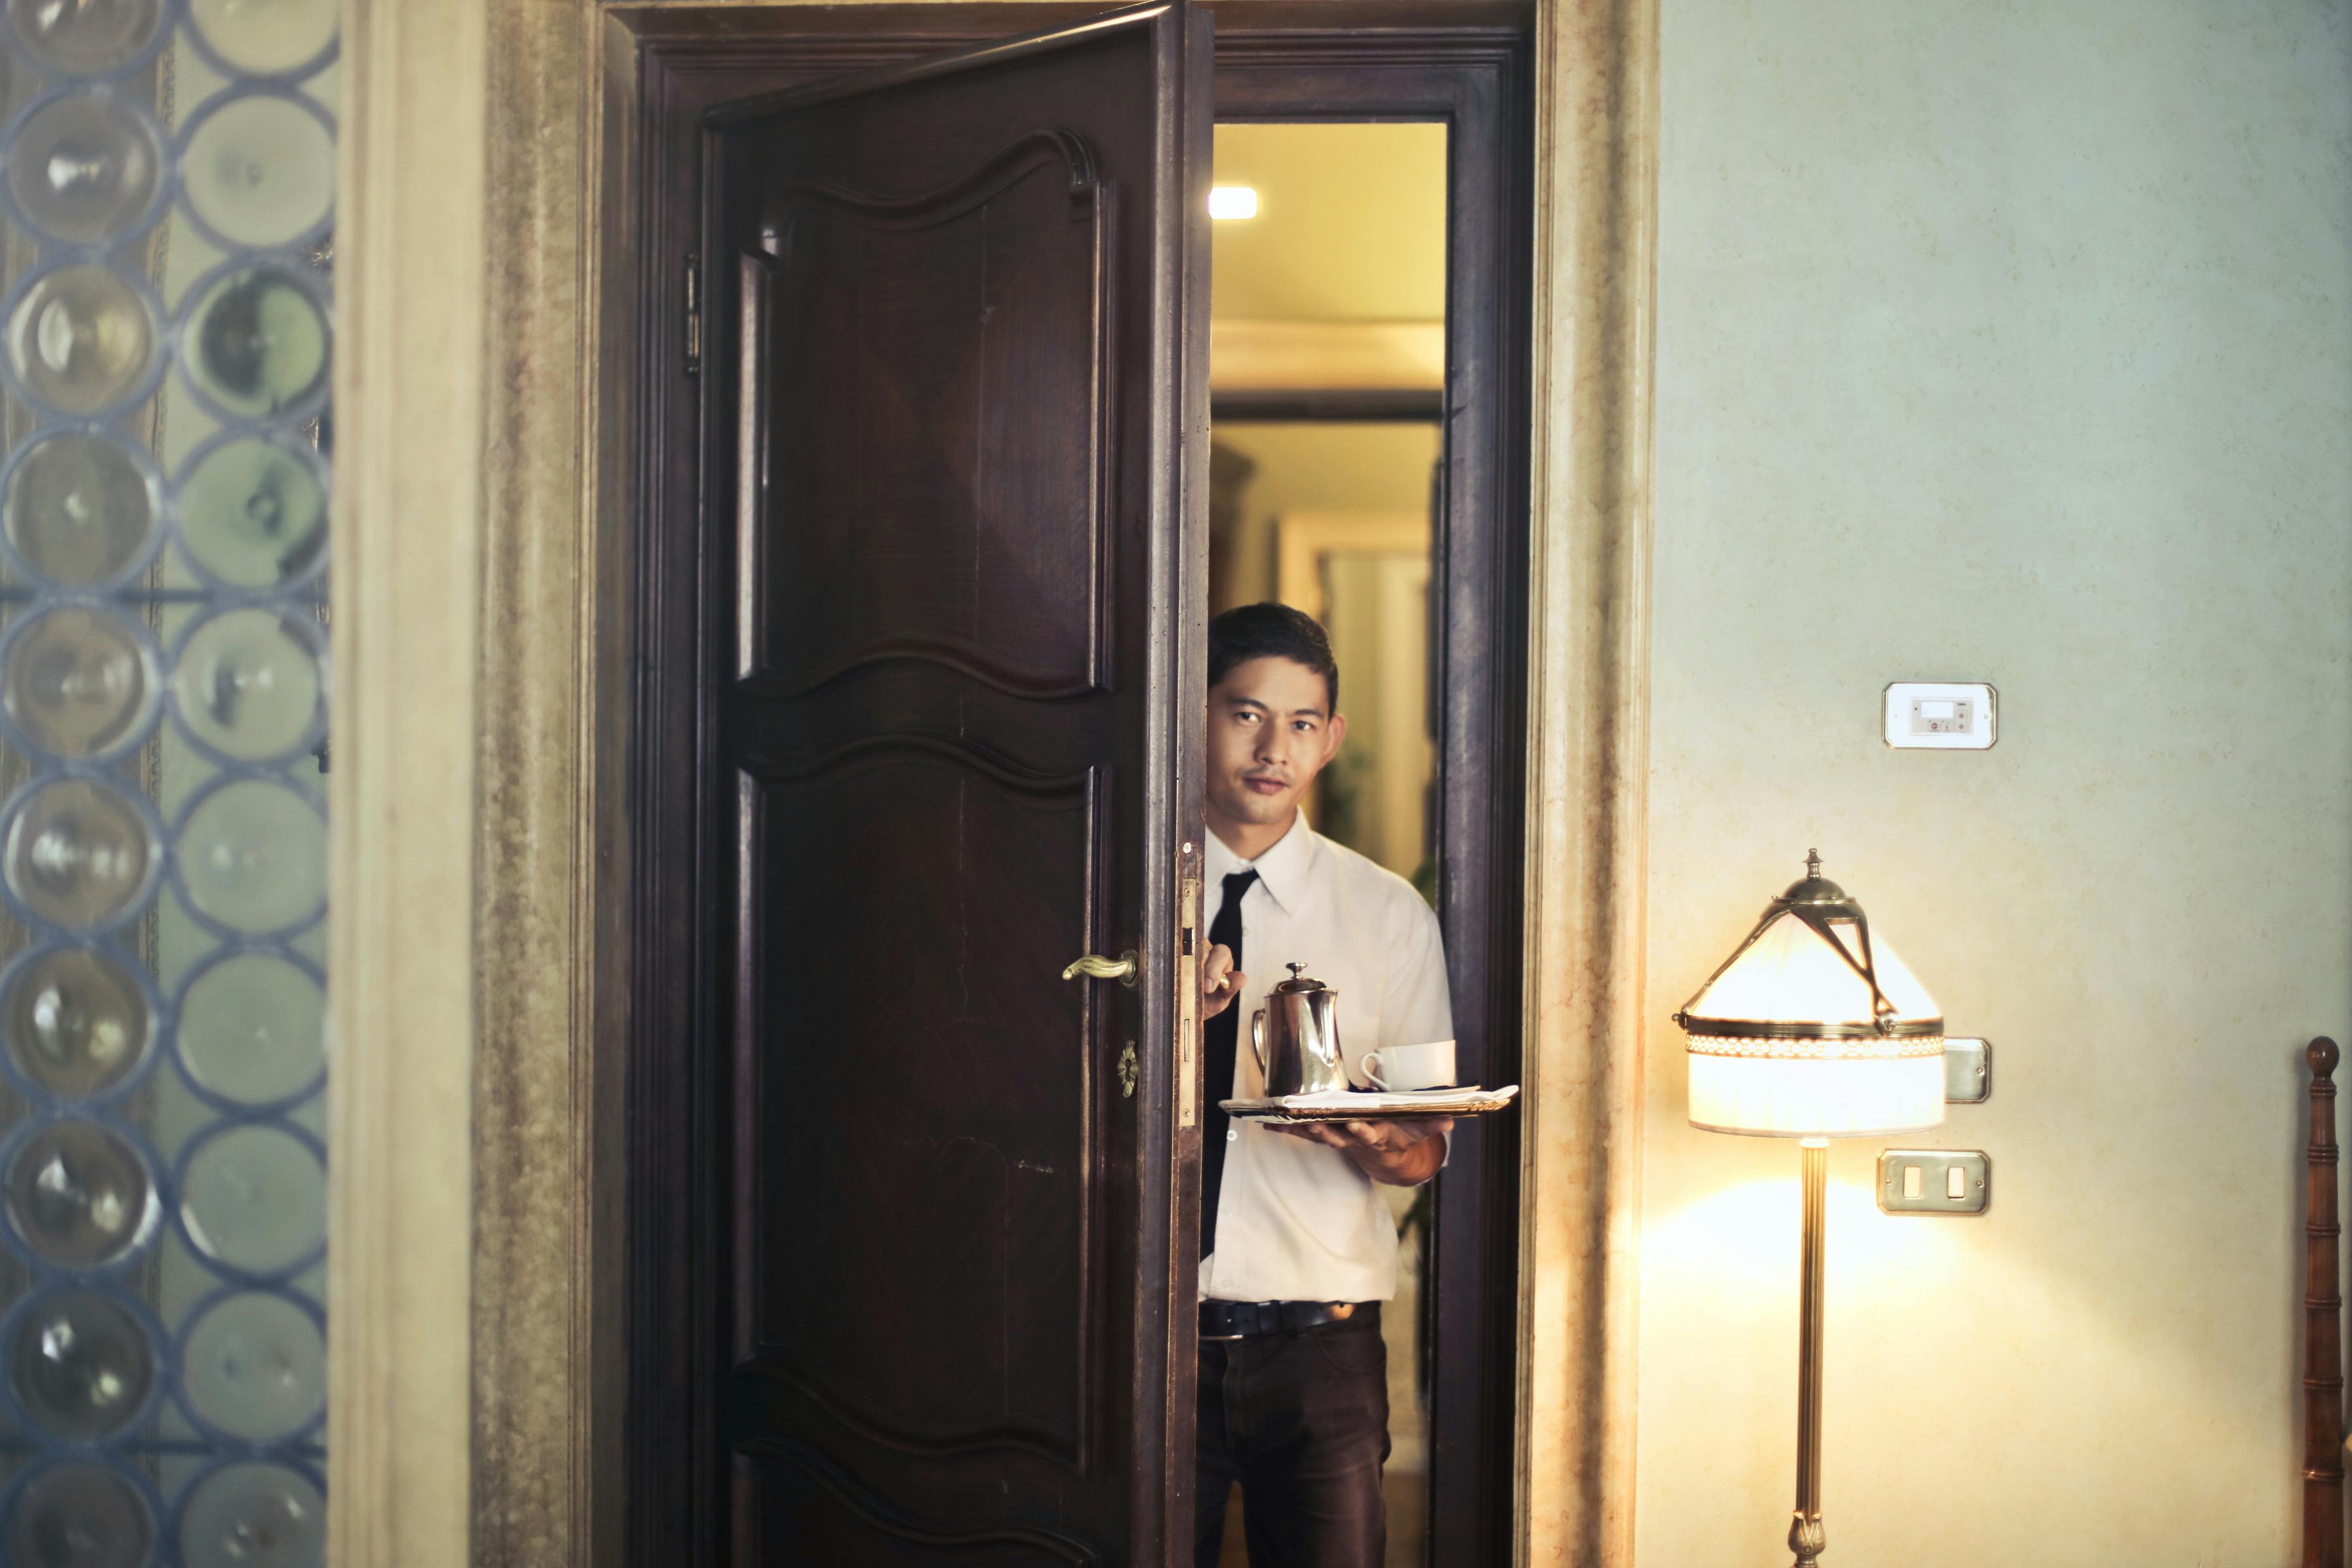 Hotel manager entering a room | Source: Pexels